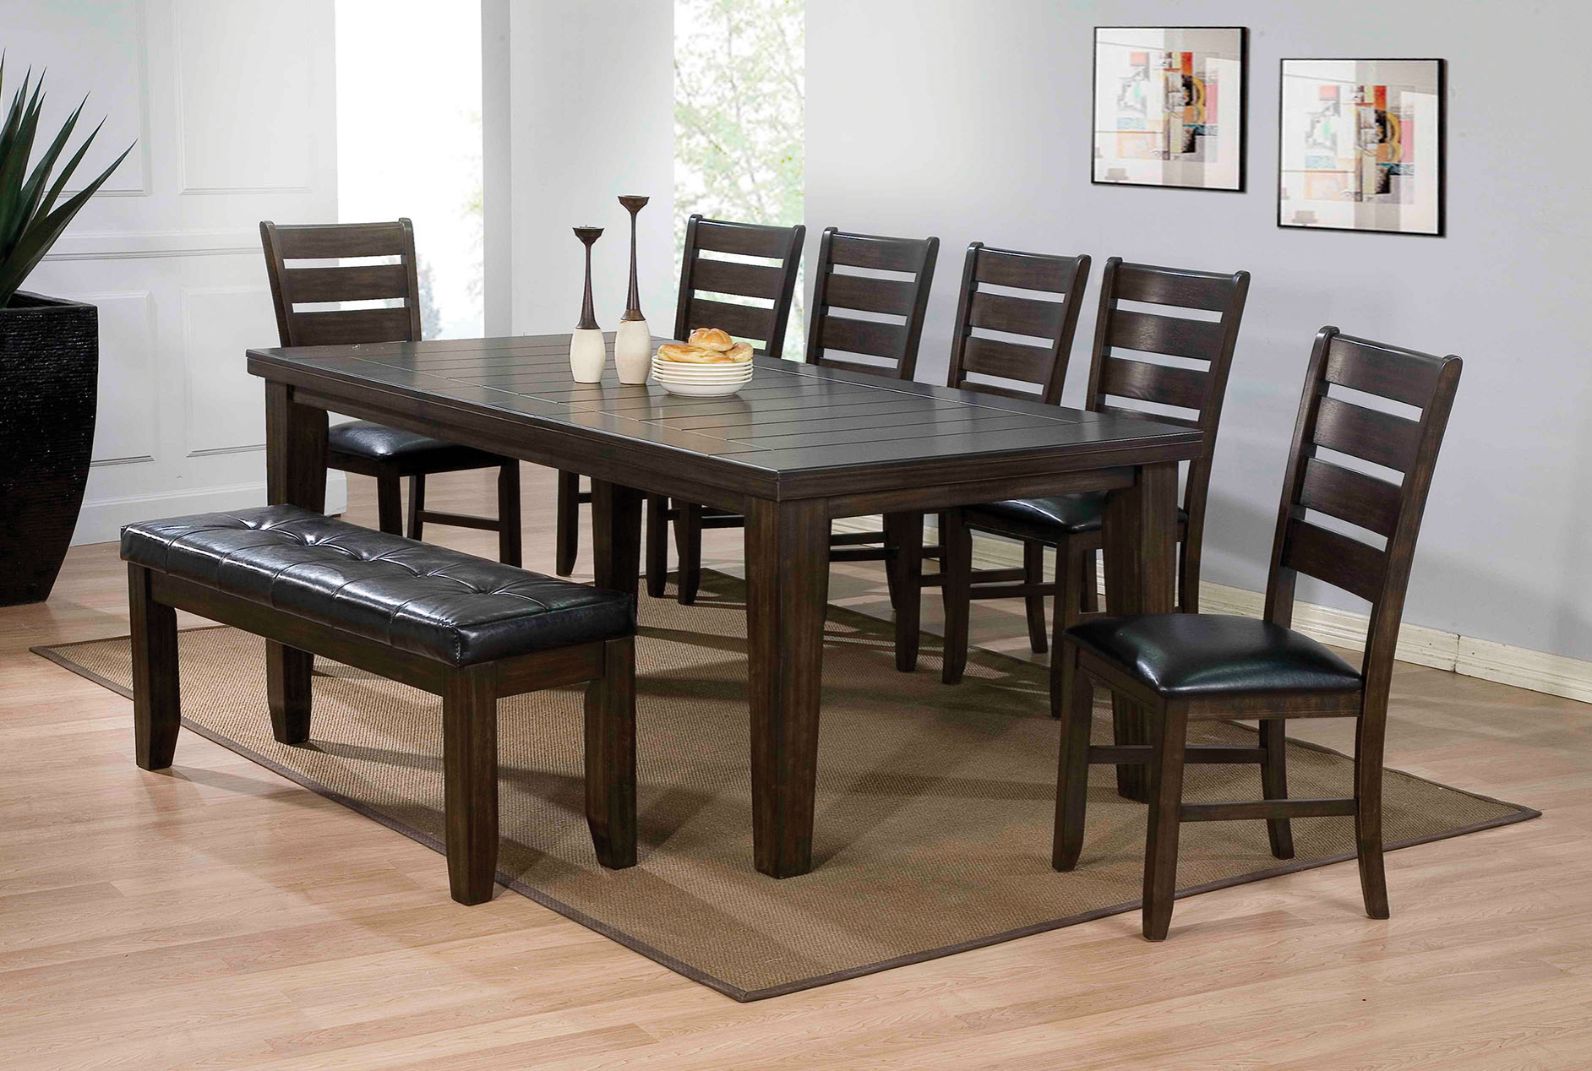 ACME Furniture Dining Tables - Urbana Dining Table, Espresso